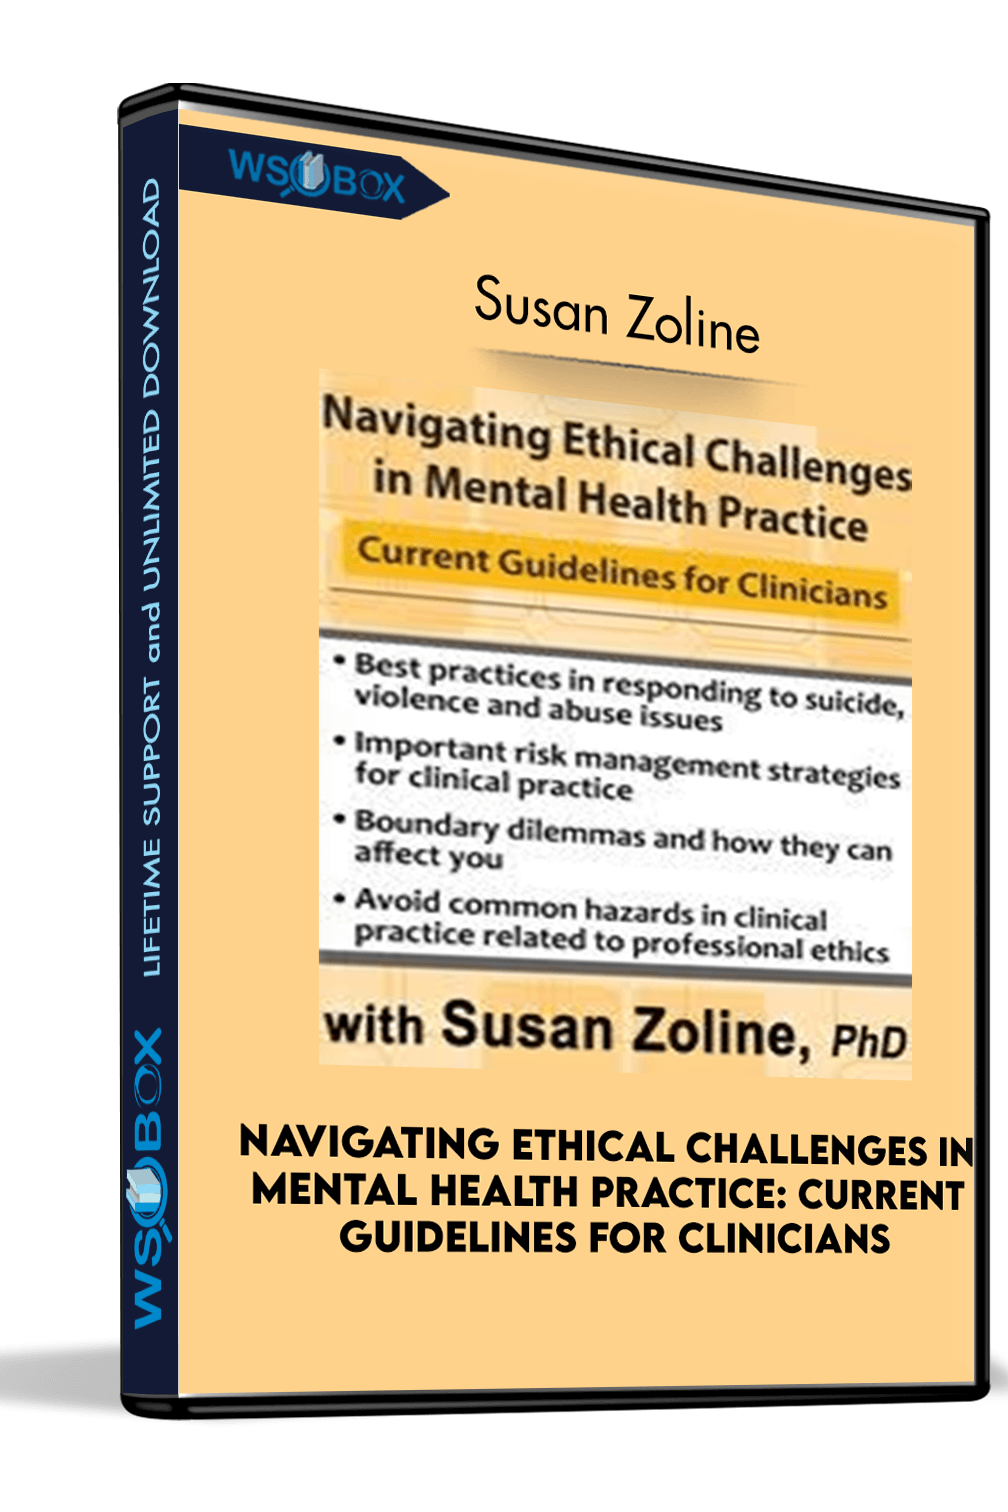 navigating-ethical-challenges-in-mental-health-practice-current-guidelines-for-clinicians-susan-zoline